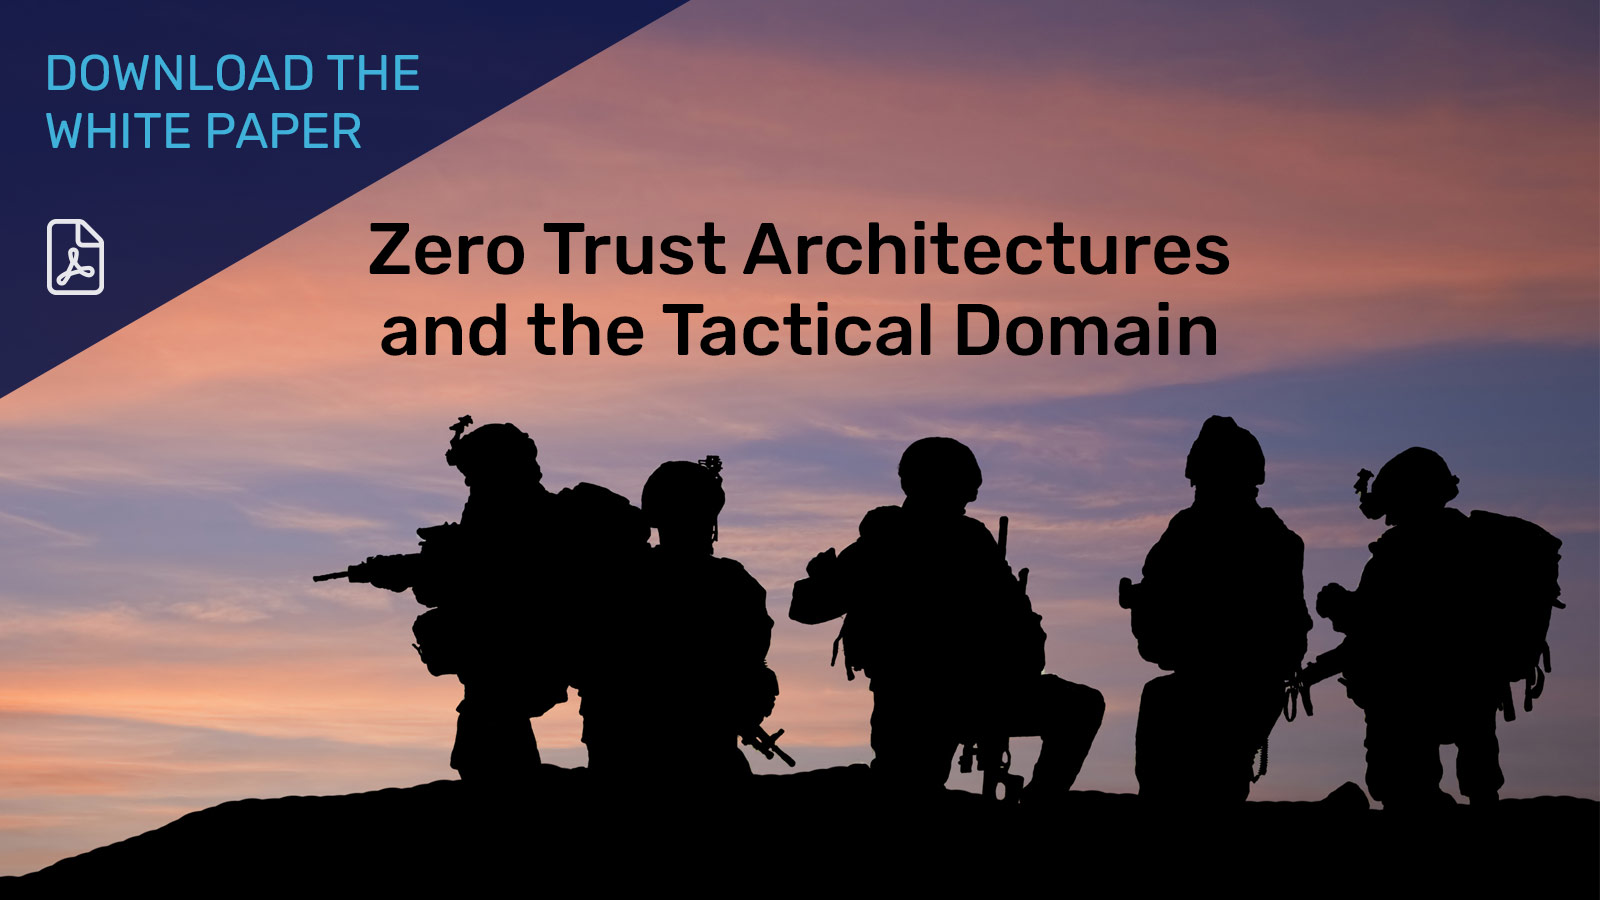 Zero Trust Architecture and the Tactical Domain